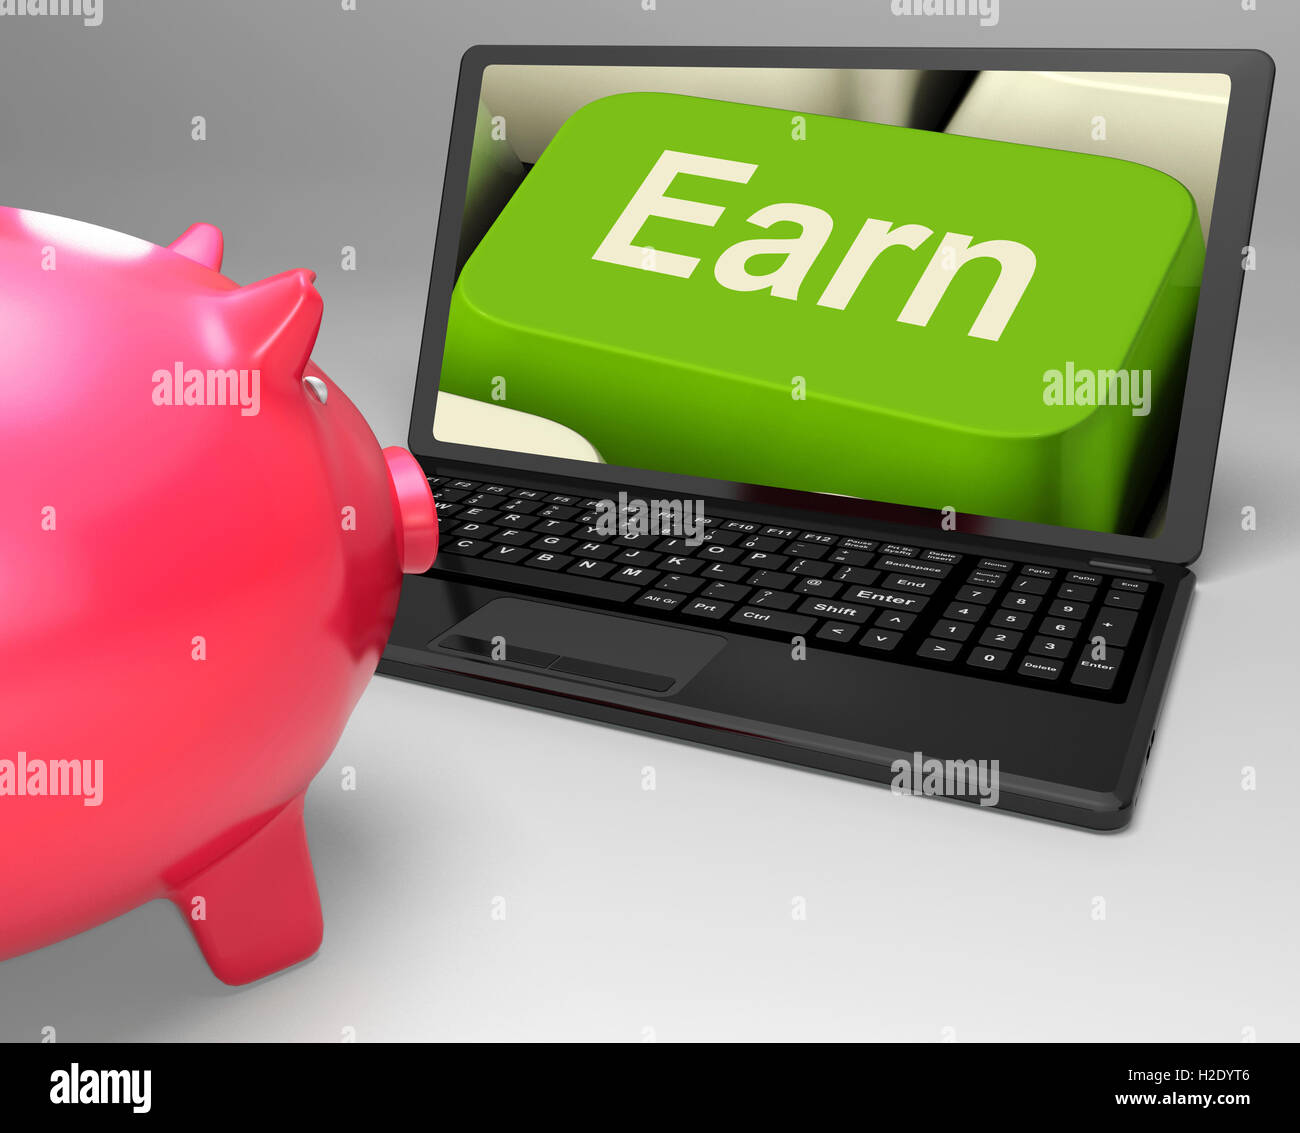 Earn Key Shows Web Income Profit And Revenue Stock Photo